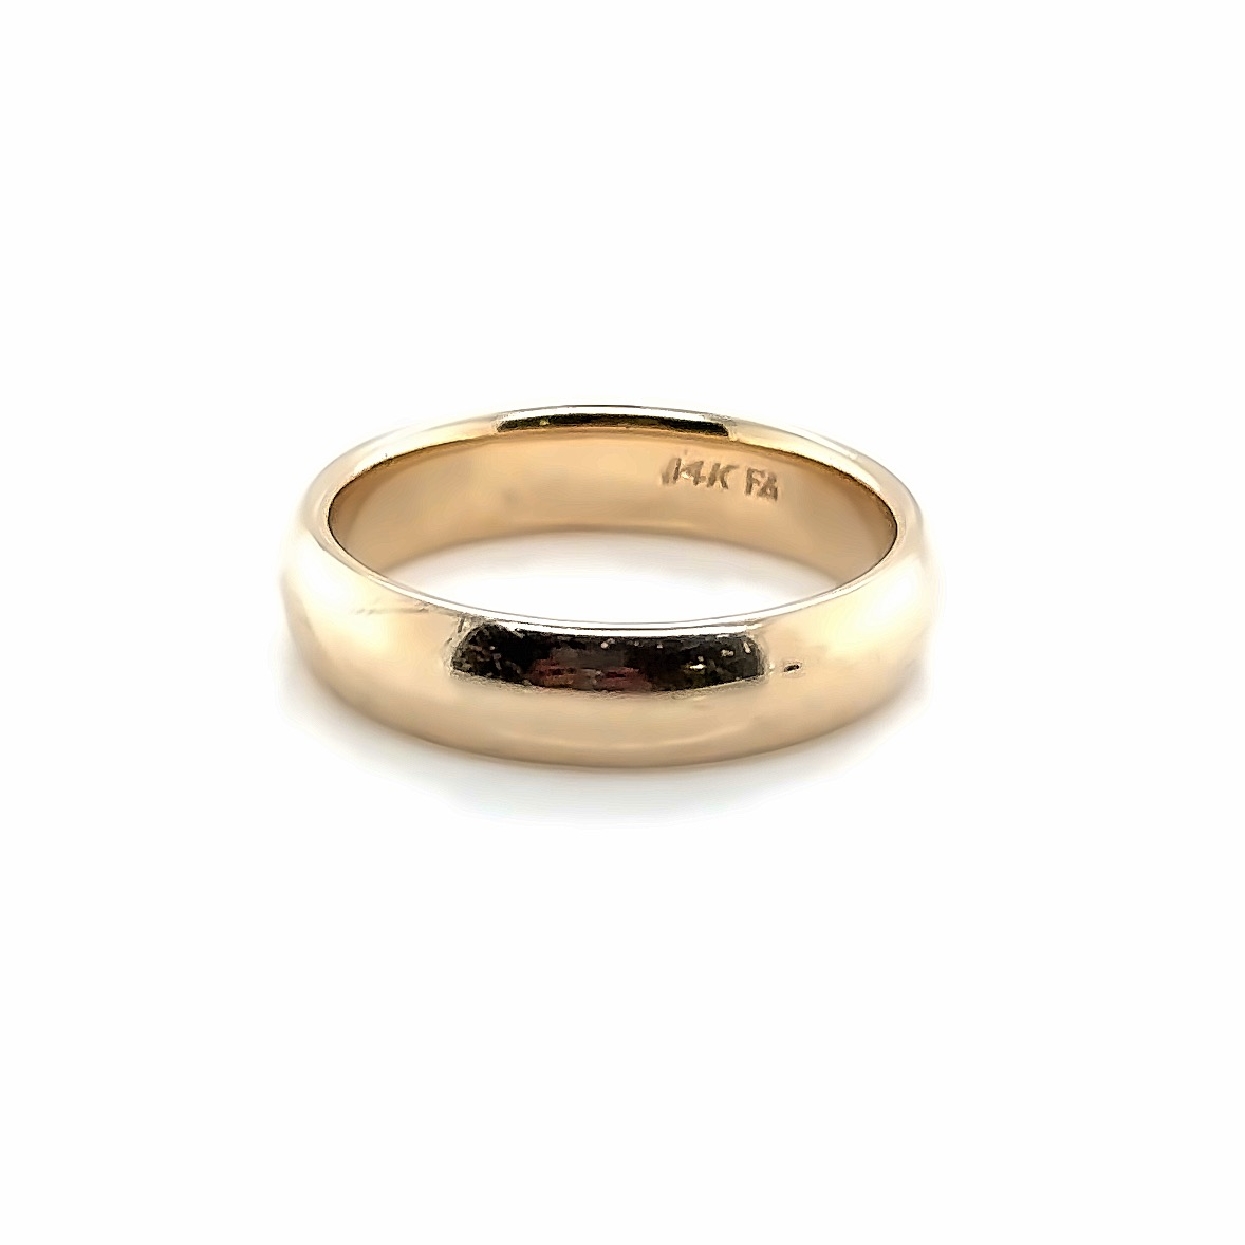 14K Yellow Gold Comfort Fit Wedding Band

Size 12